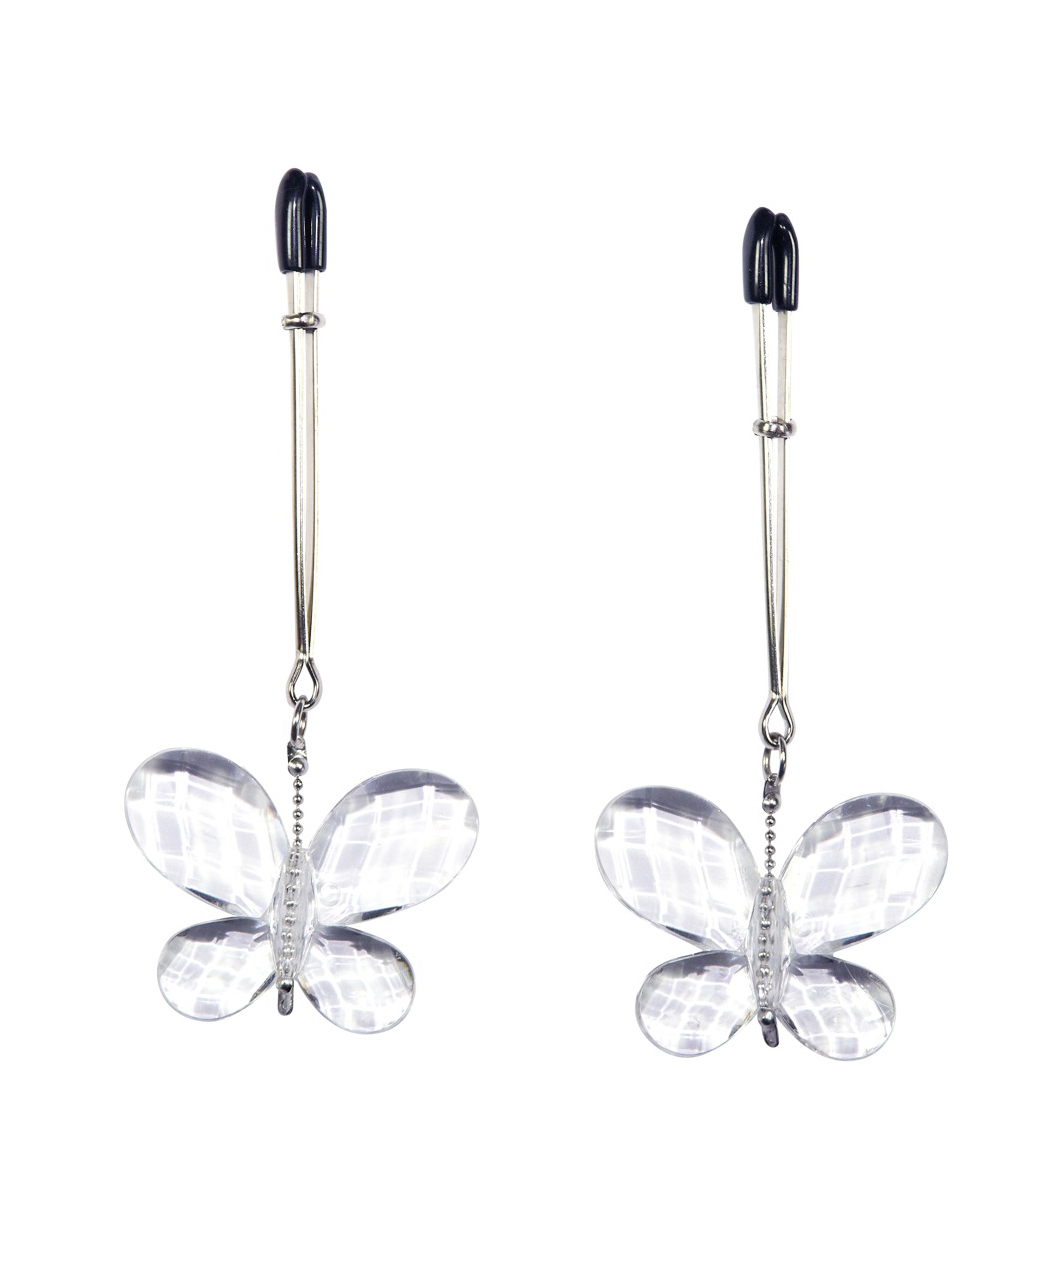 Bad Kitty butterfly clamps